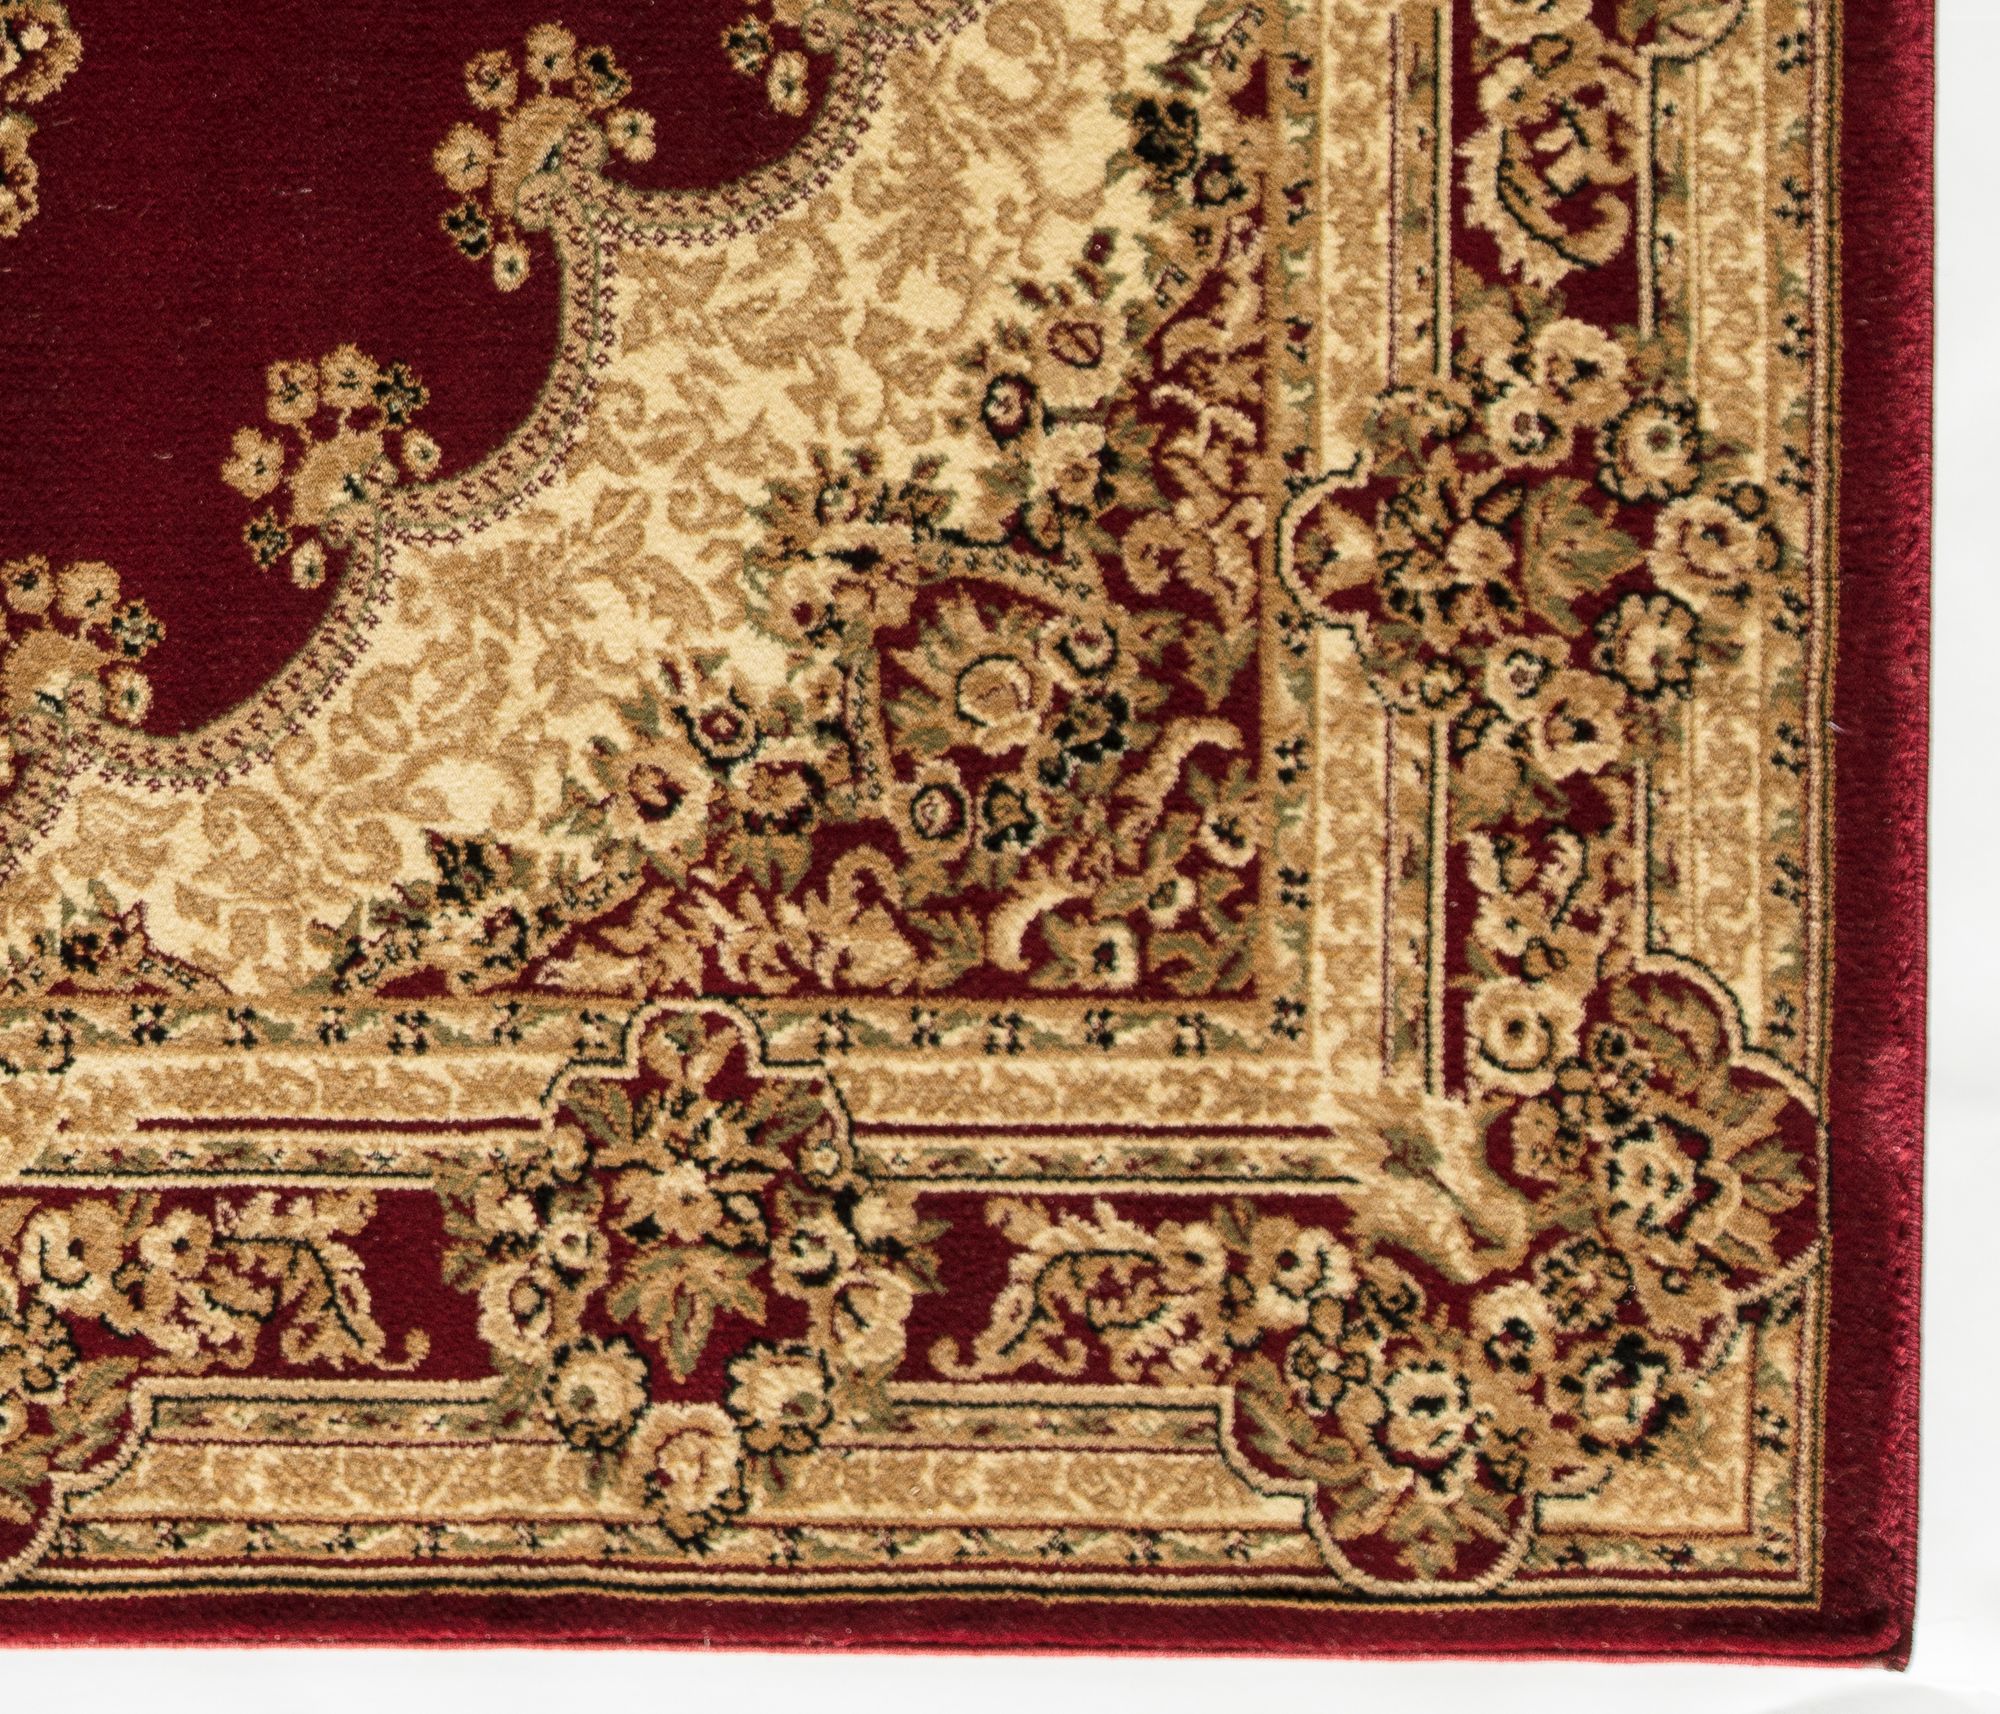 Rugs America Vista 807-RED Kerman Red Oriental Traditional Red Area Rug, 7'10"x10'10" - image 5 of 5